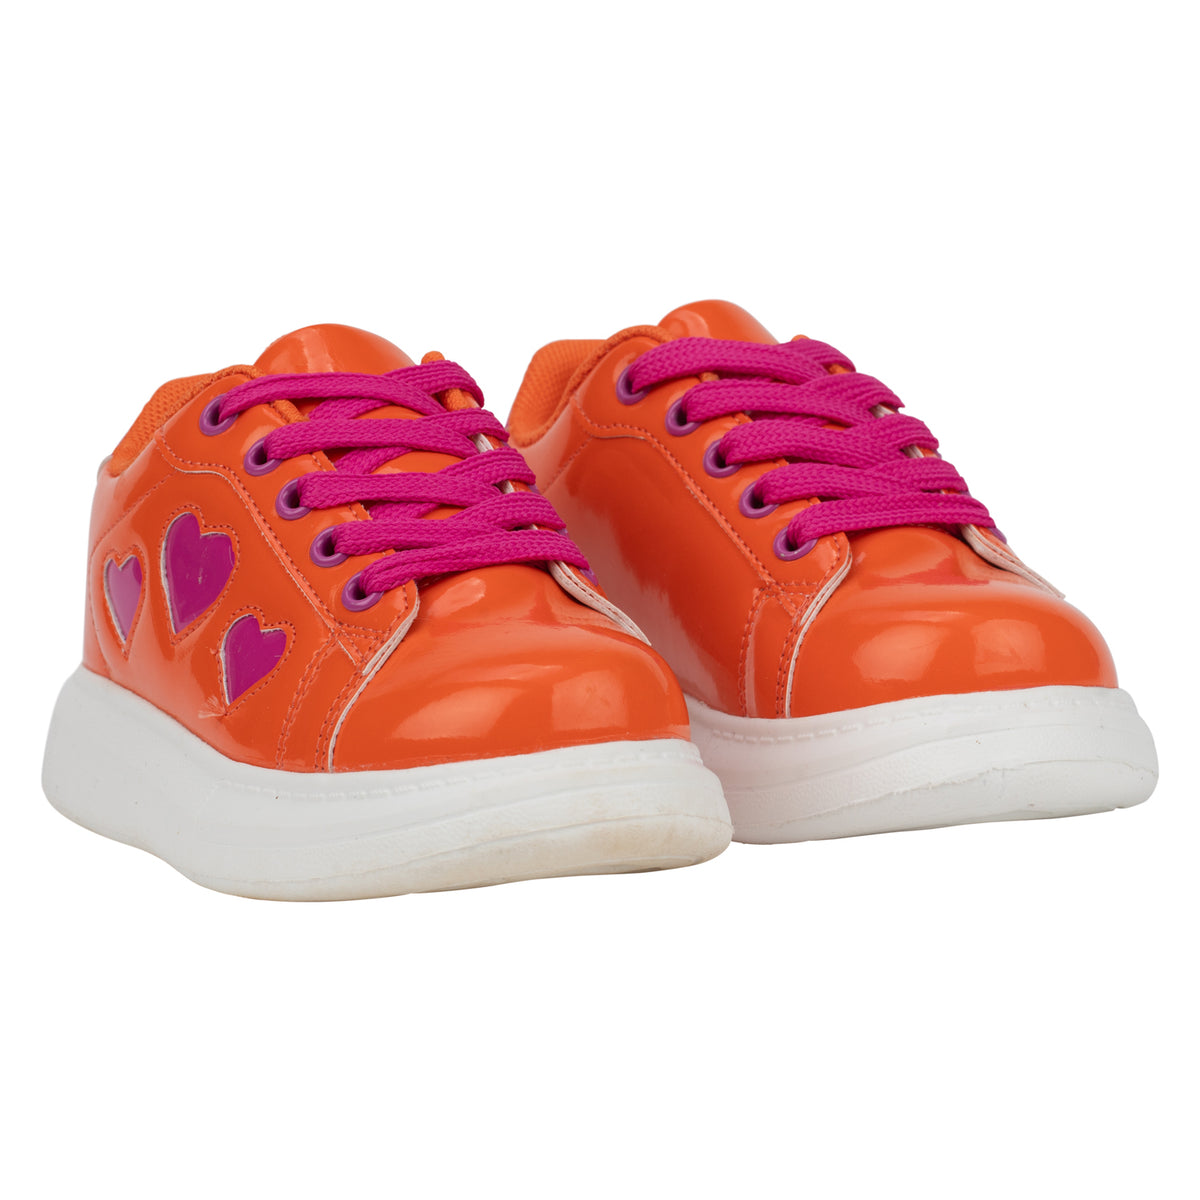 A Dee Girls 'Queeny' Orange Chunky Trainers